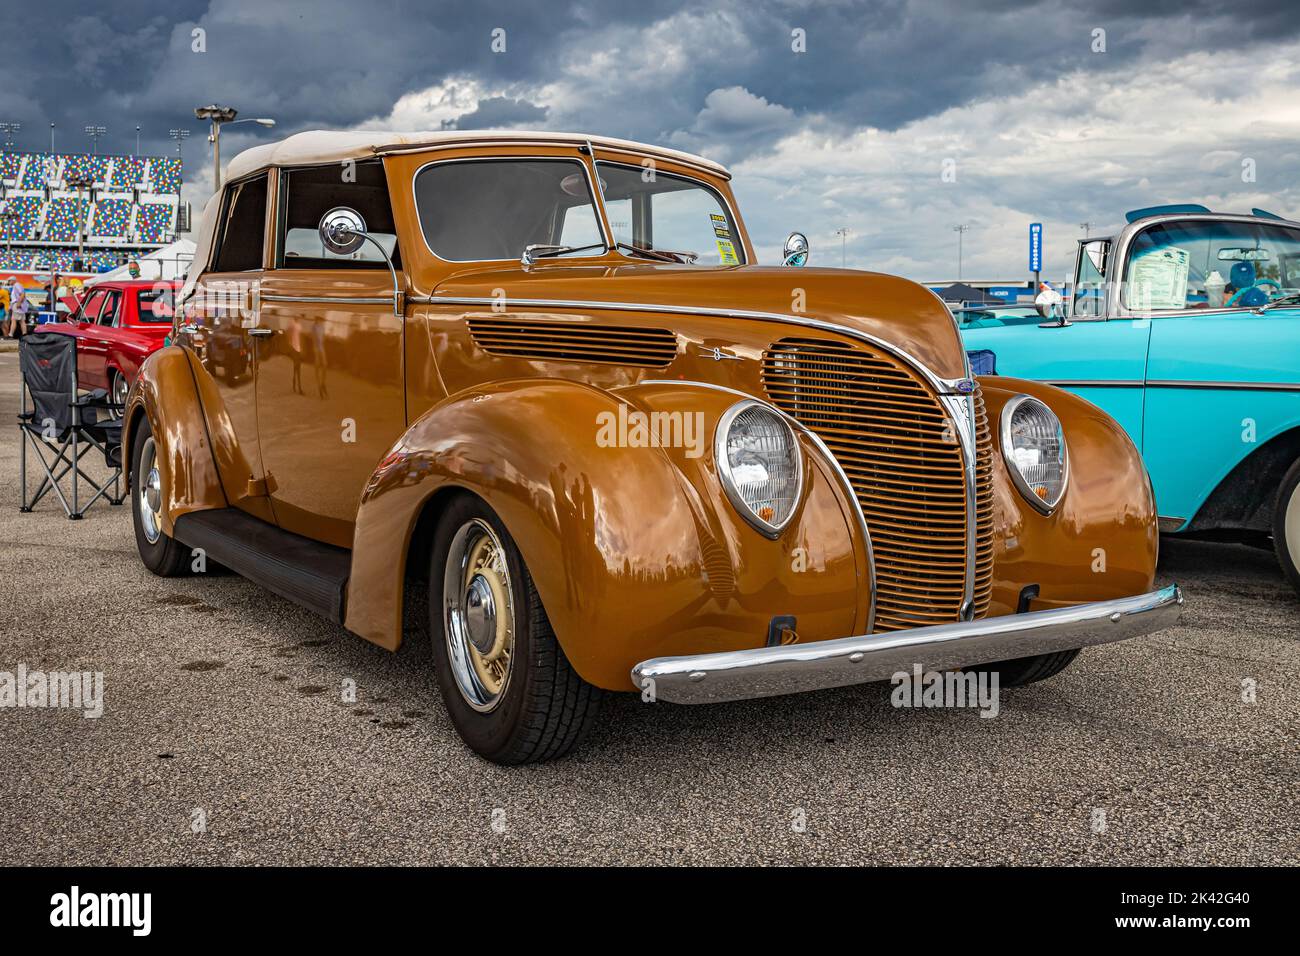 Daytona Beach, FL - November 28, 2020: Low perspective front corner view of a 1938 Ford Deluxe Model 82A 4 Door Convertible Sedan at a local car show. Stock Photo